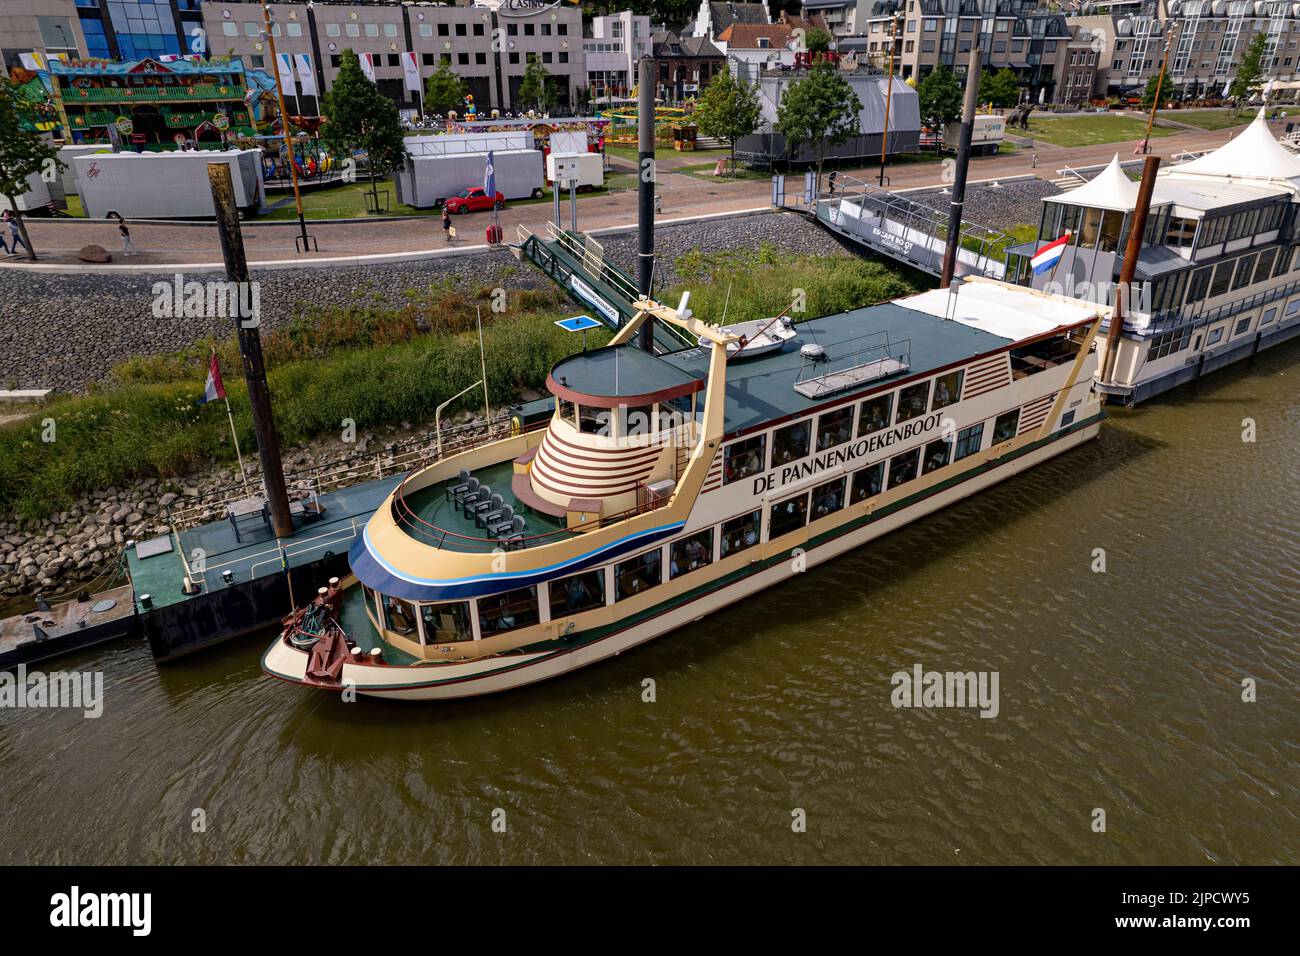 Floating pancake restaurant all you can eat Pannenkoekenboot at anchor seen from above on the shore of historic Hanseatic city of Nijmegen Stock Photo